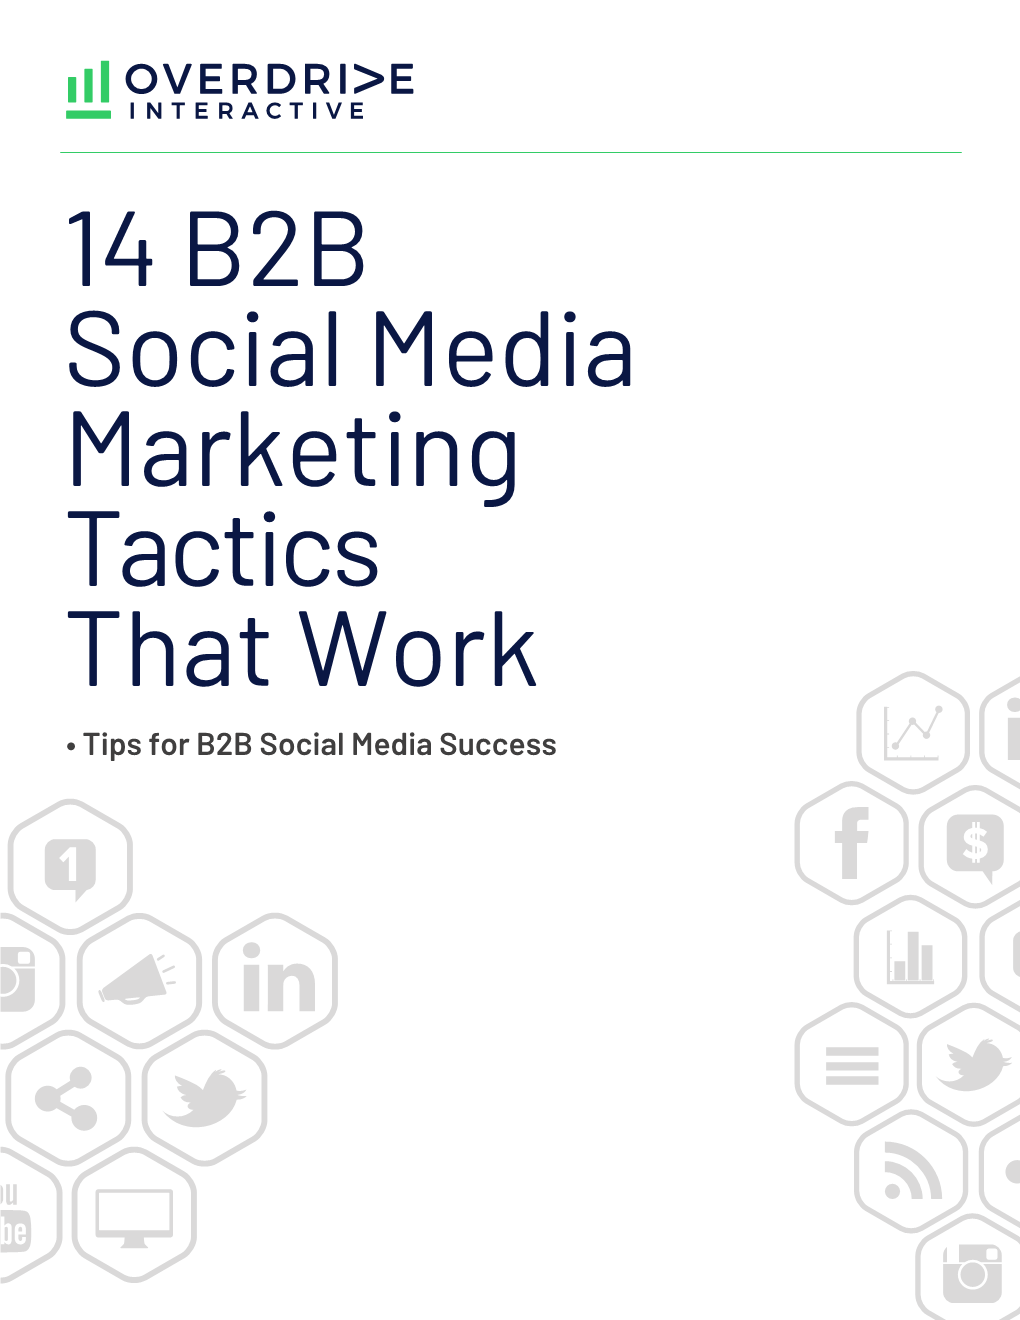 14 B2B Social Media Marketing Tactics That Work • Tips for B2B Social Media Success Your Social Community and Encouraging the Share